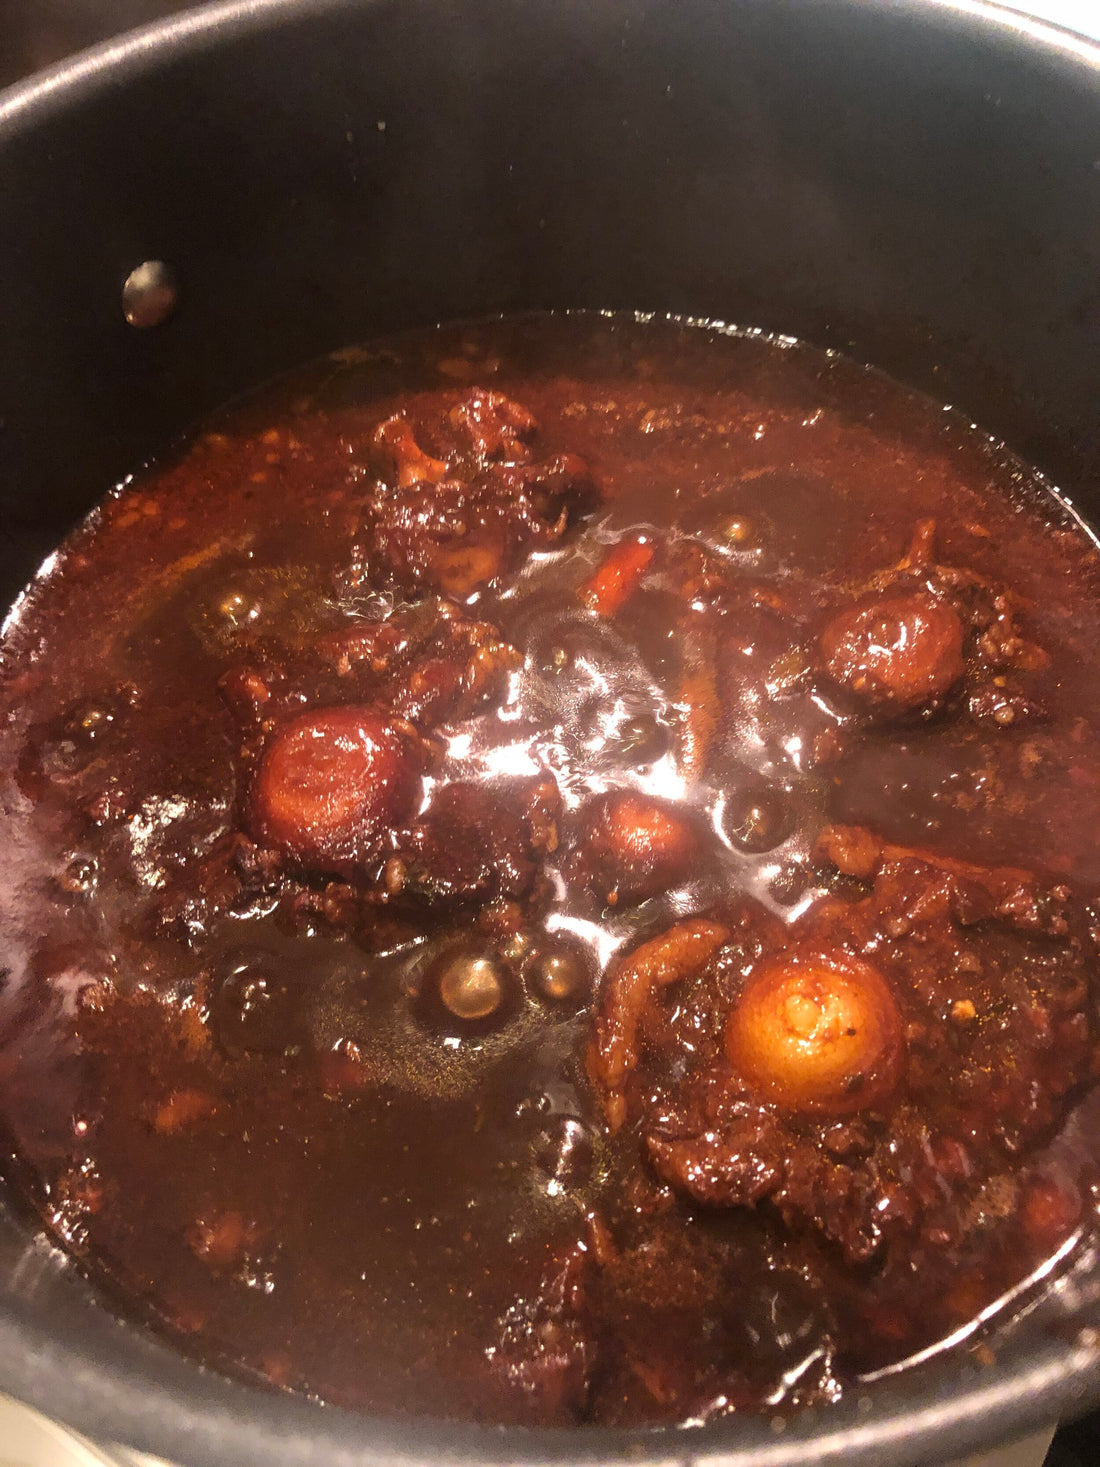 My Prized Dish, My Favorite Meal: Oxtail (Yes Grandma Taught Me This Too)